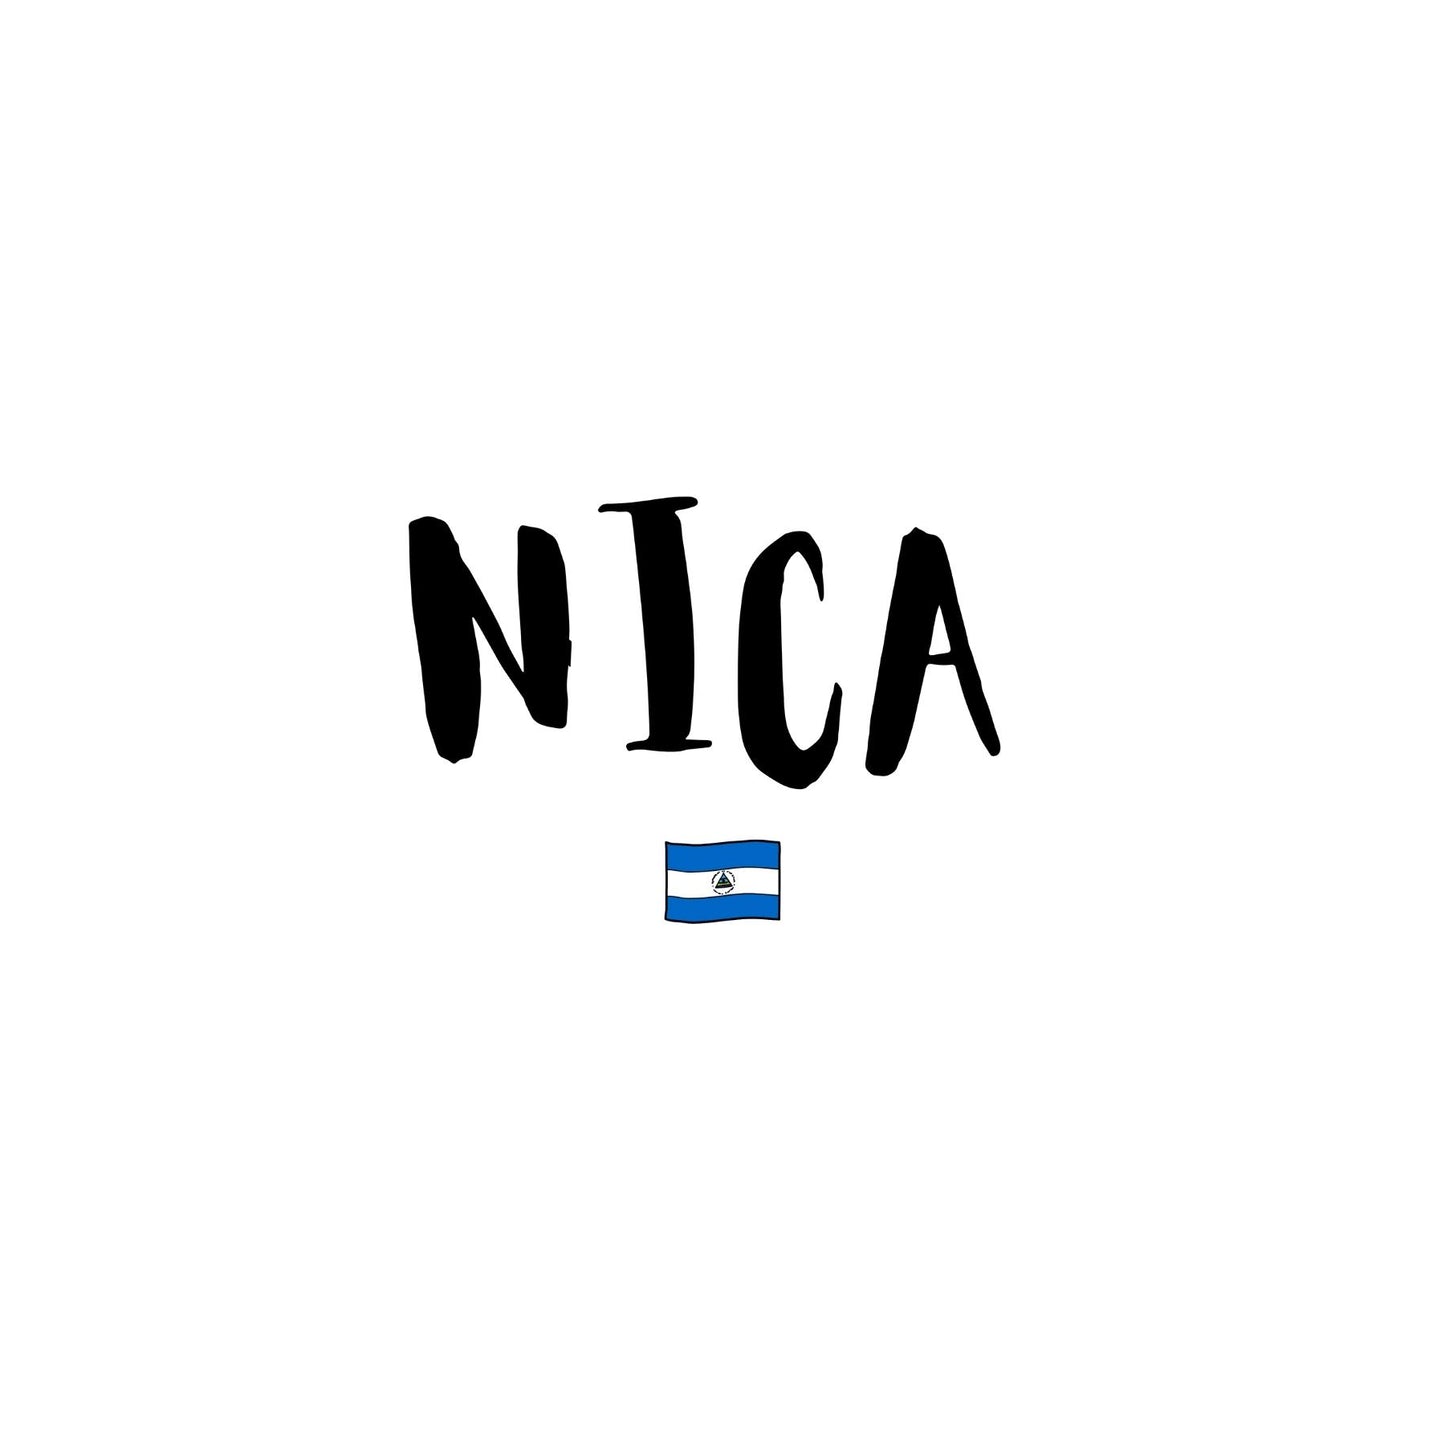 🇳🇮 Nica (Mujeres)